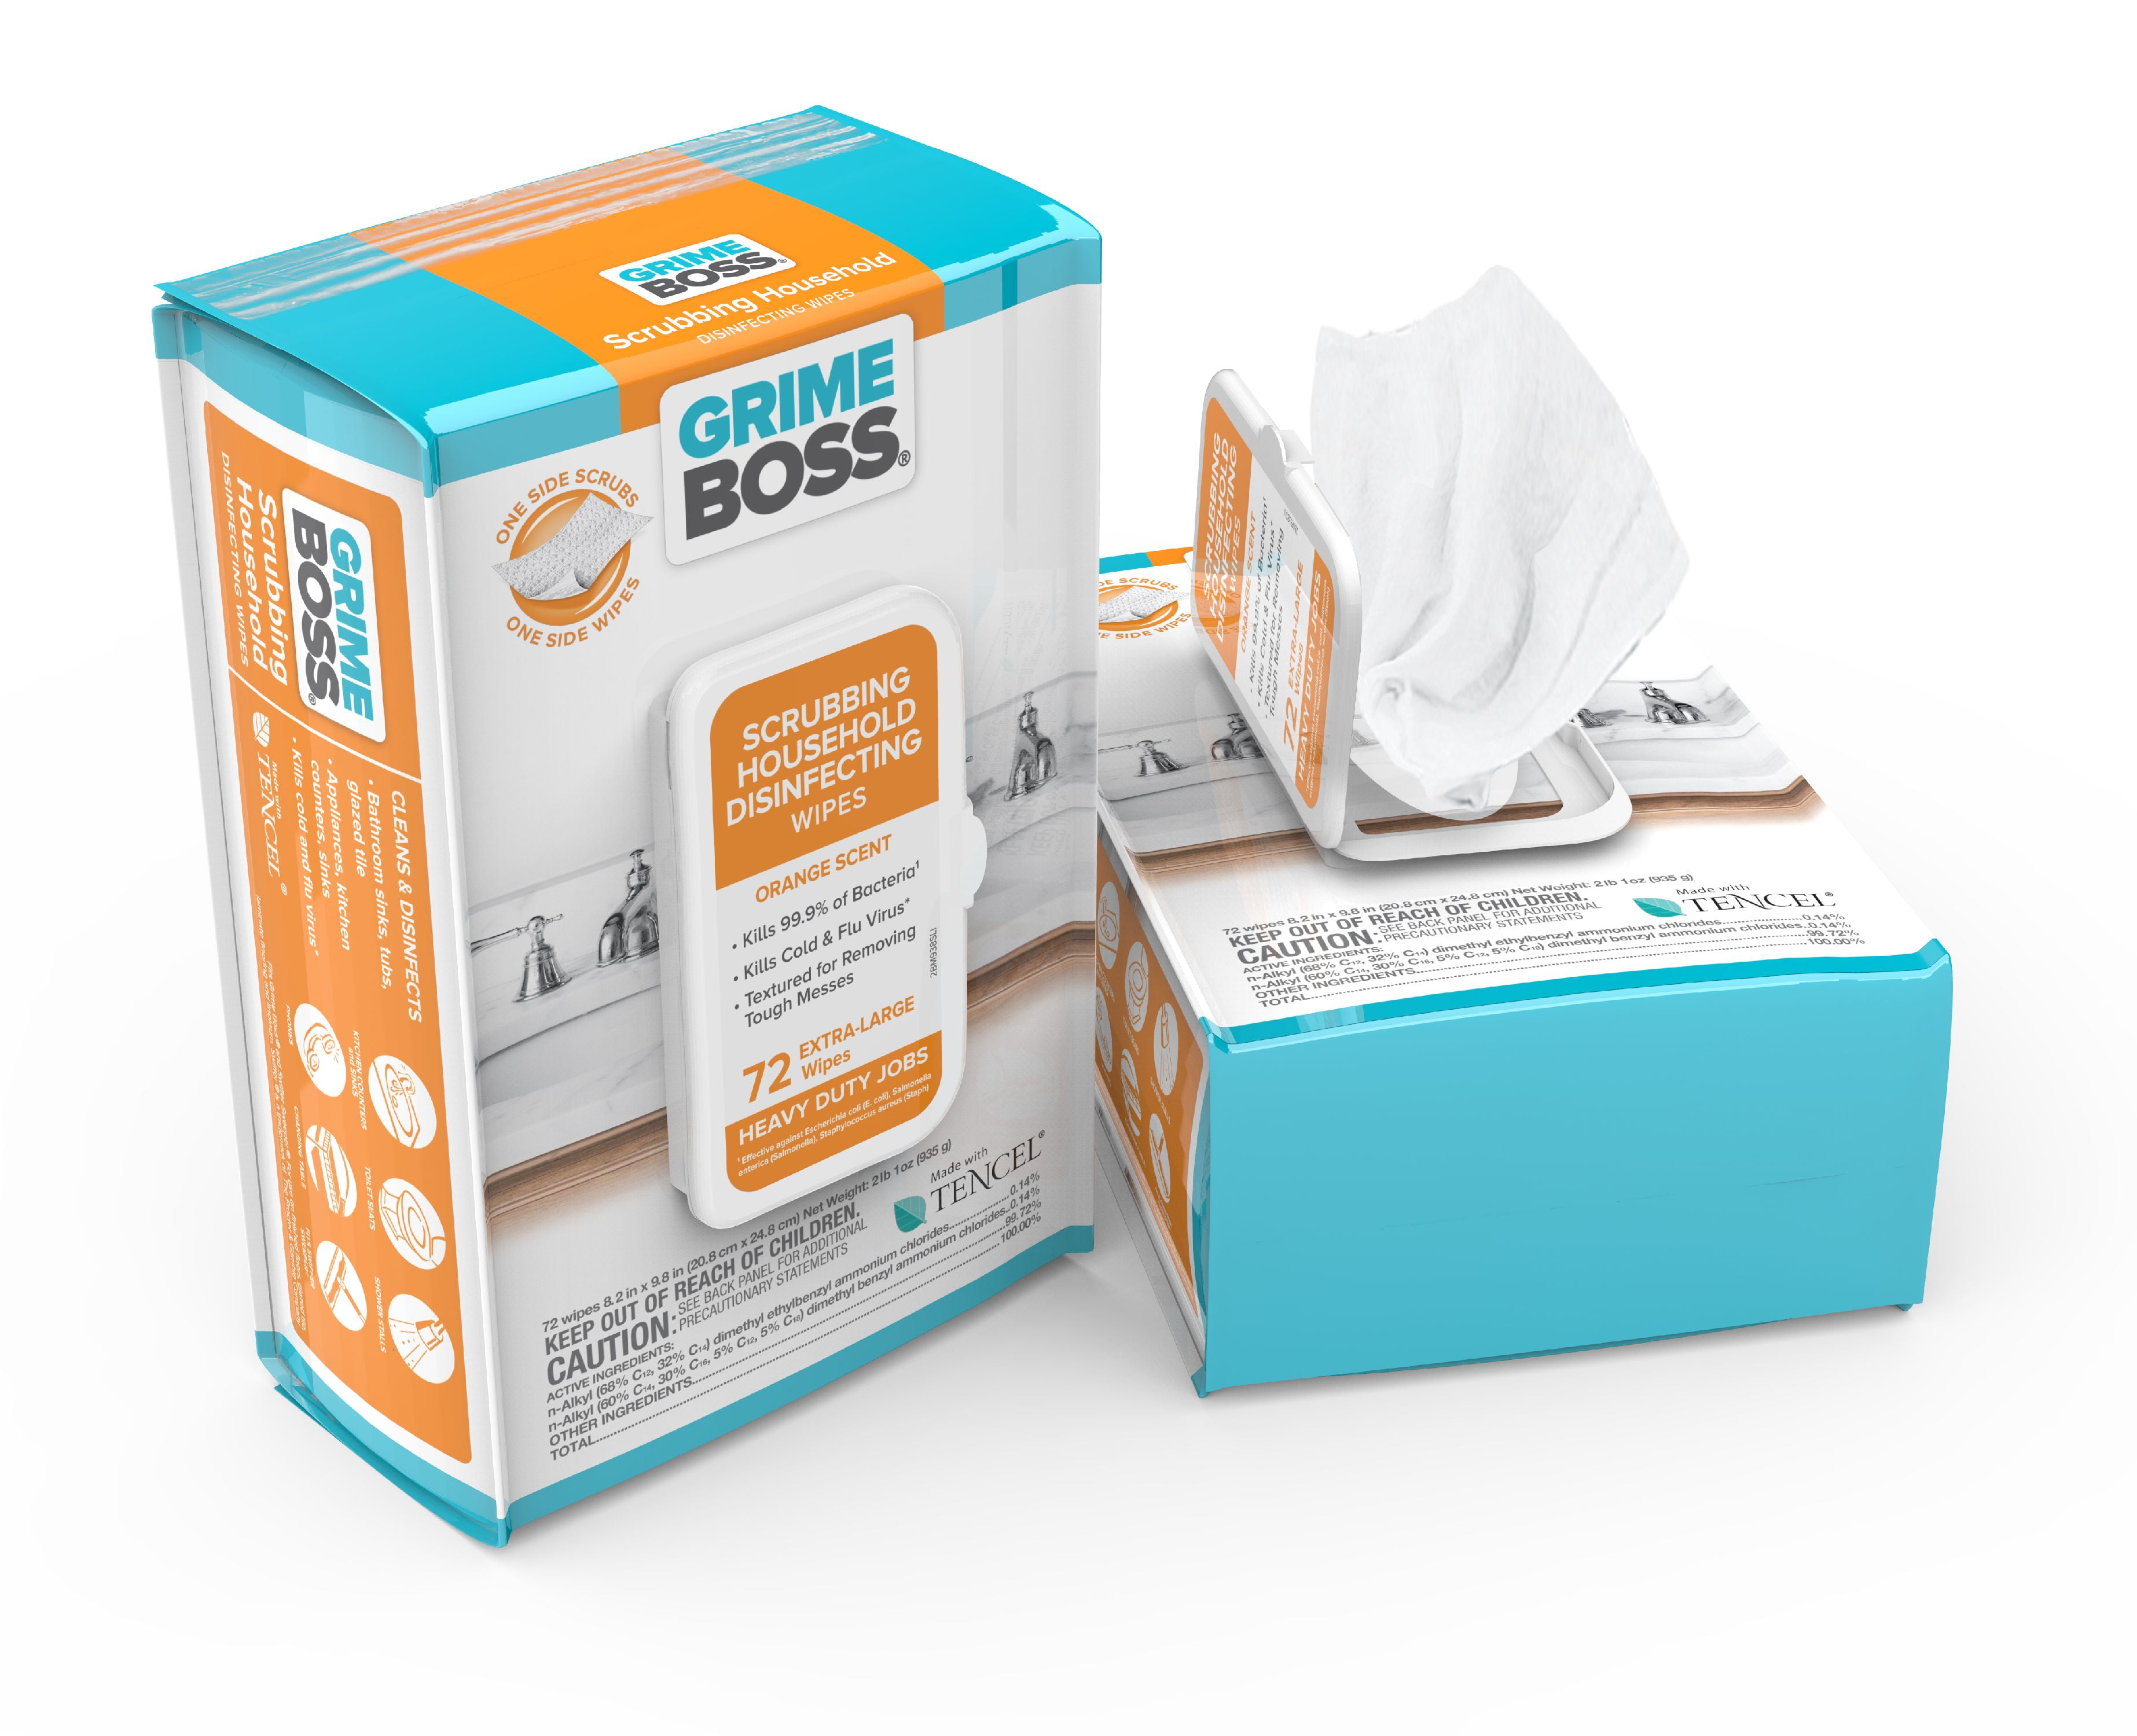  Grime Boss A541S30X Hand Wipes : Health & Household